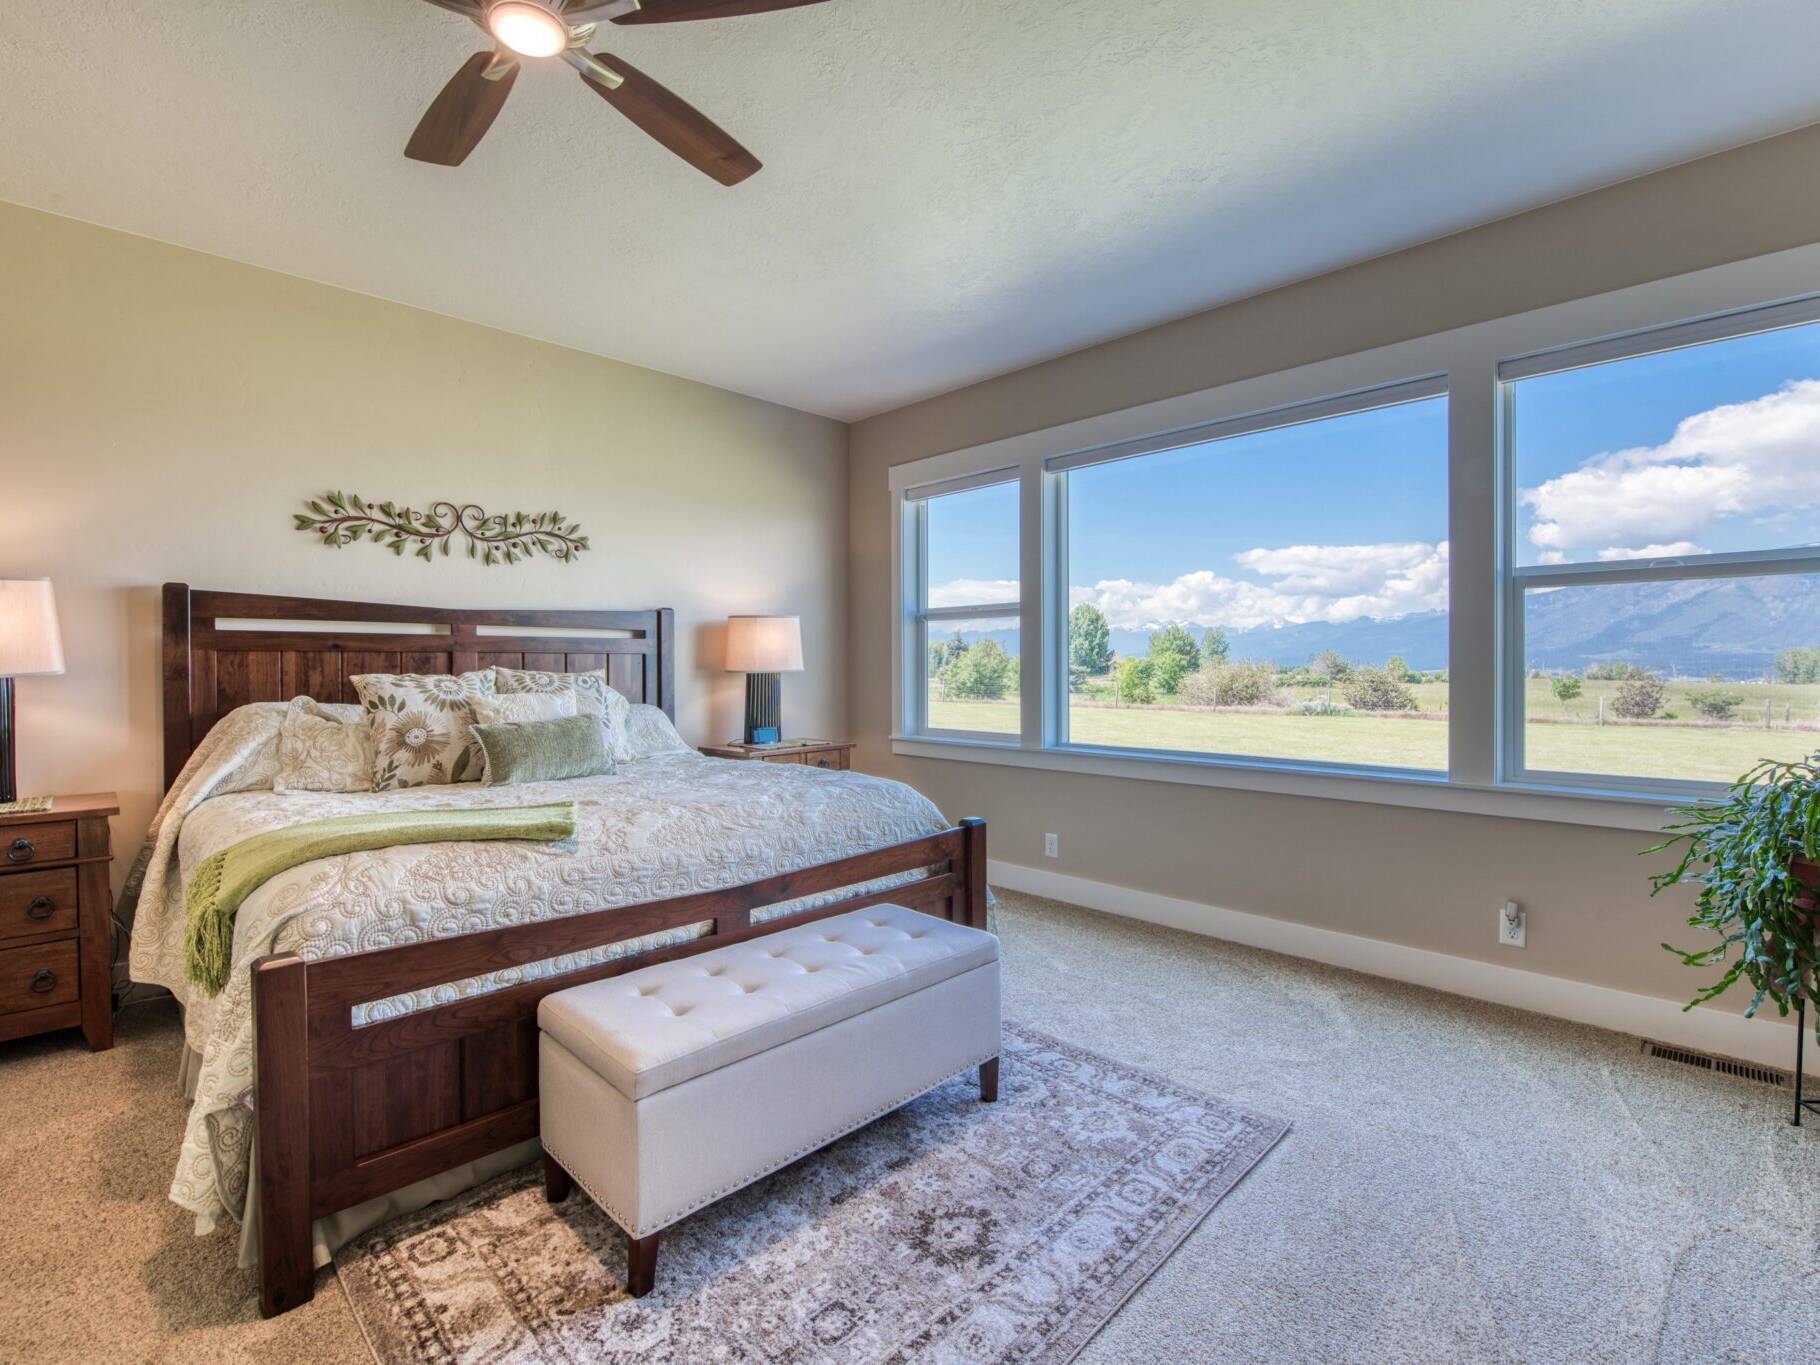 Master bedroom with large window overlooking the Bitterroot valley in a custom home built by Big Sky Builders of Montana in Hamilton, MT